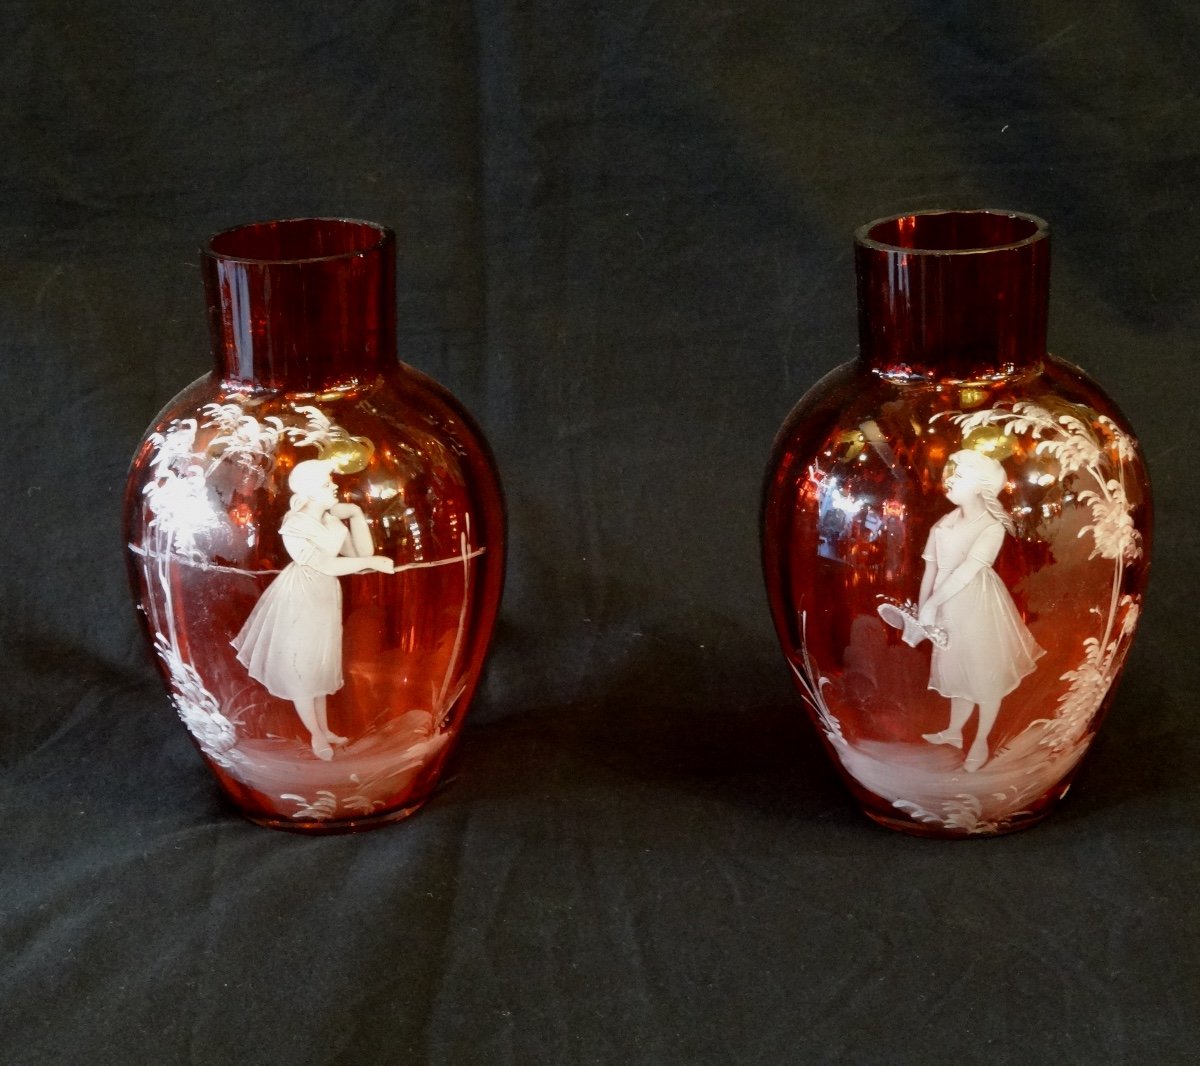 Pairs Of Enamelled Red Glass Vases With Mary Gregory Decor, Late Nineteenth